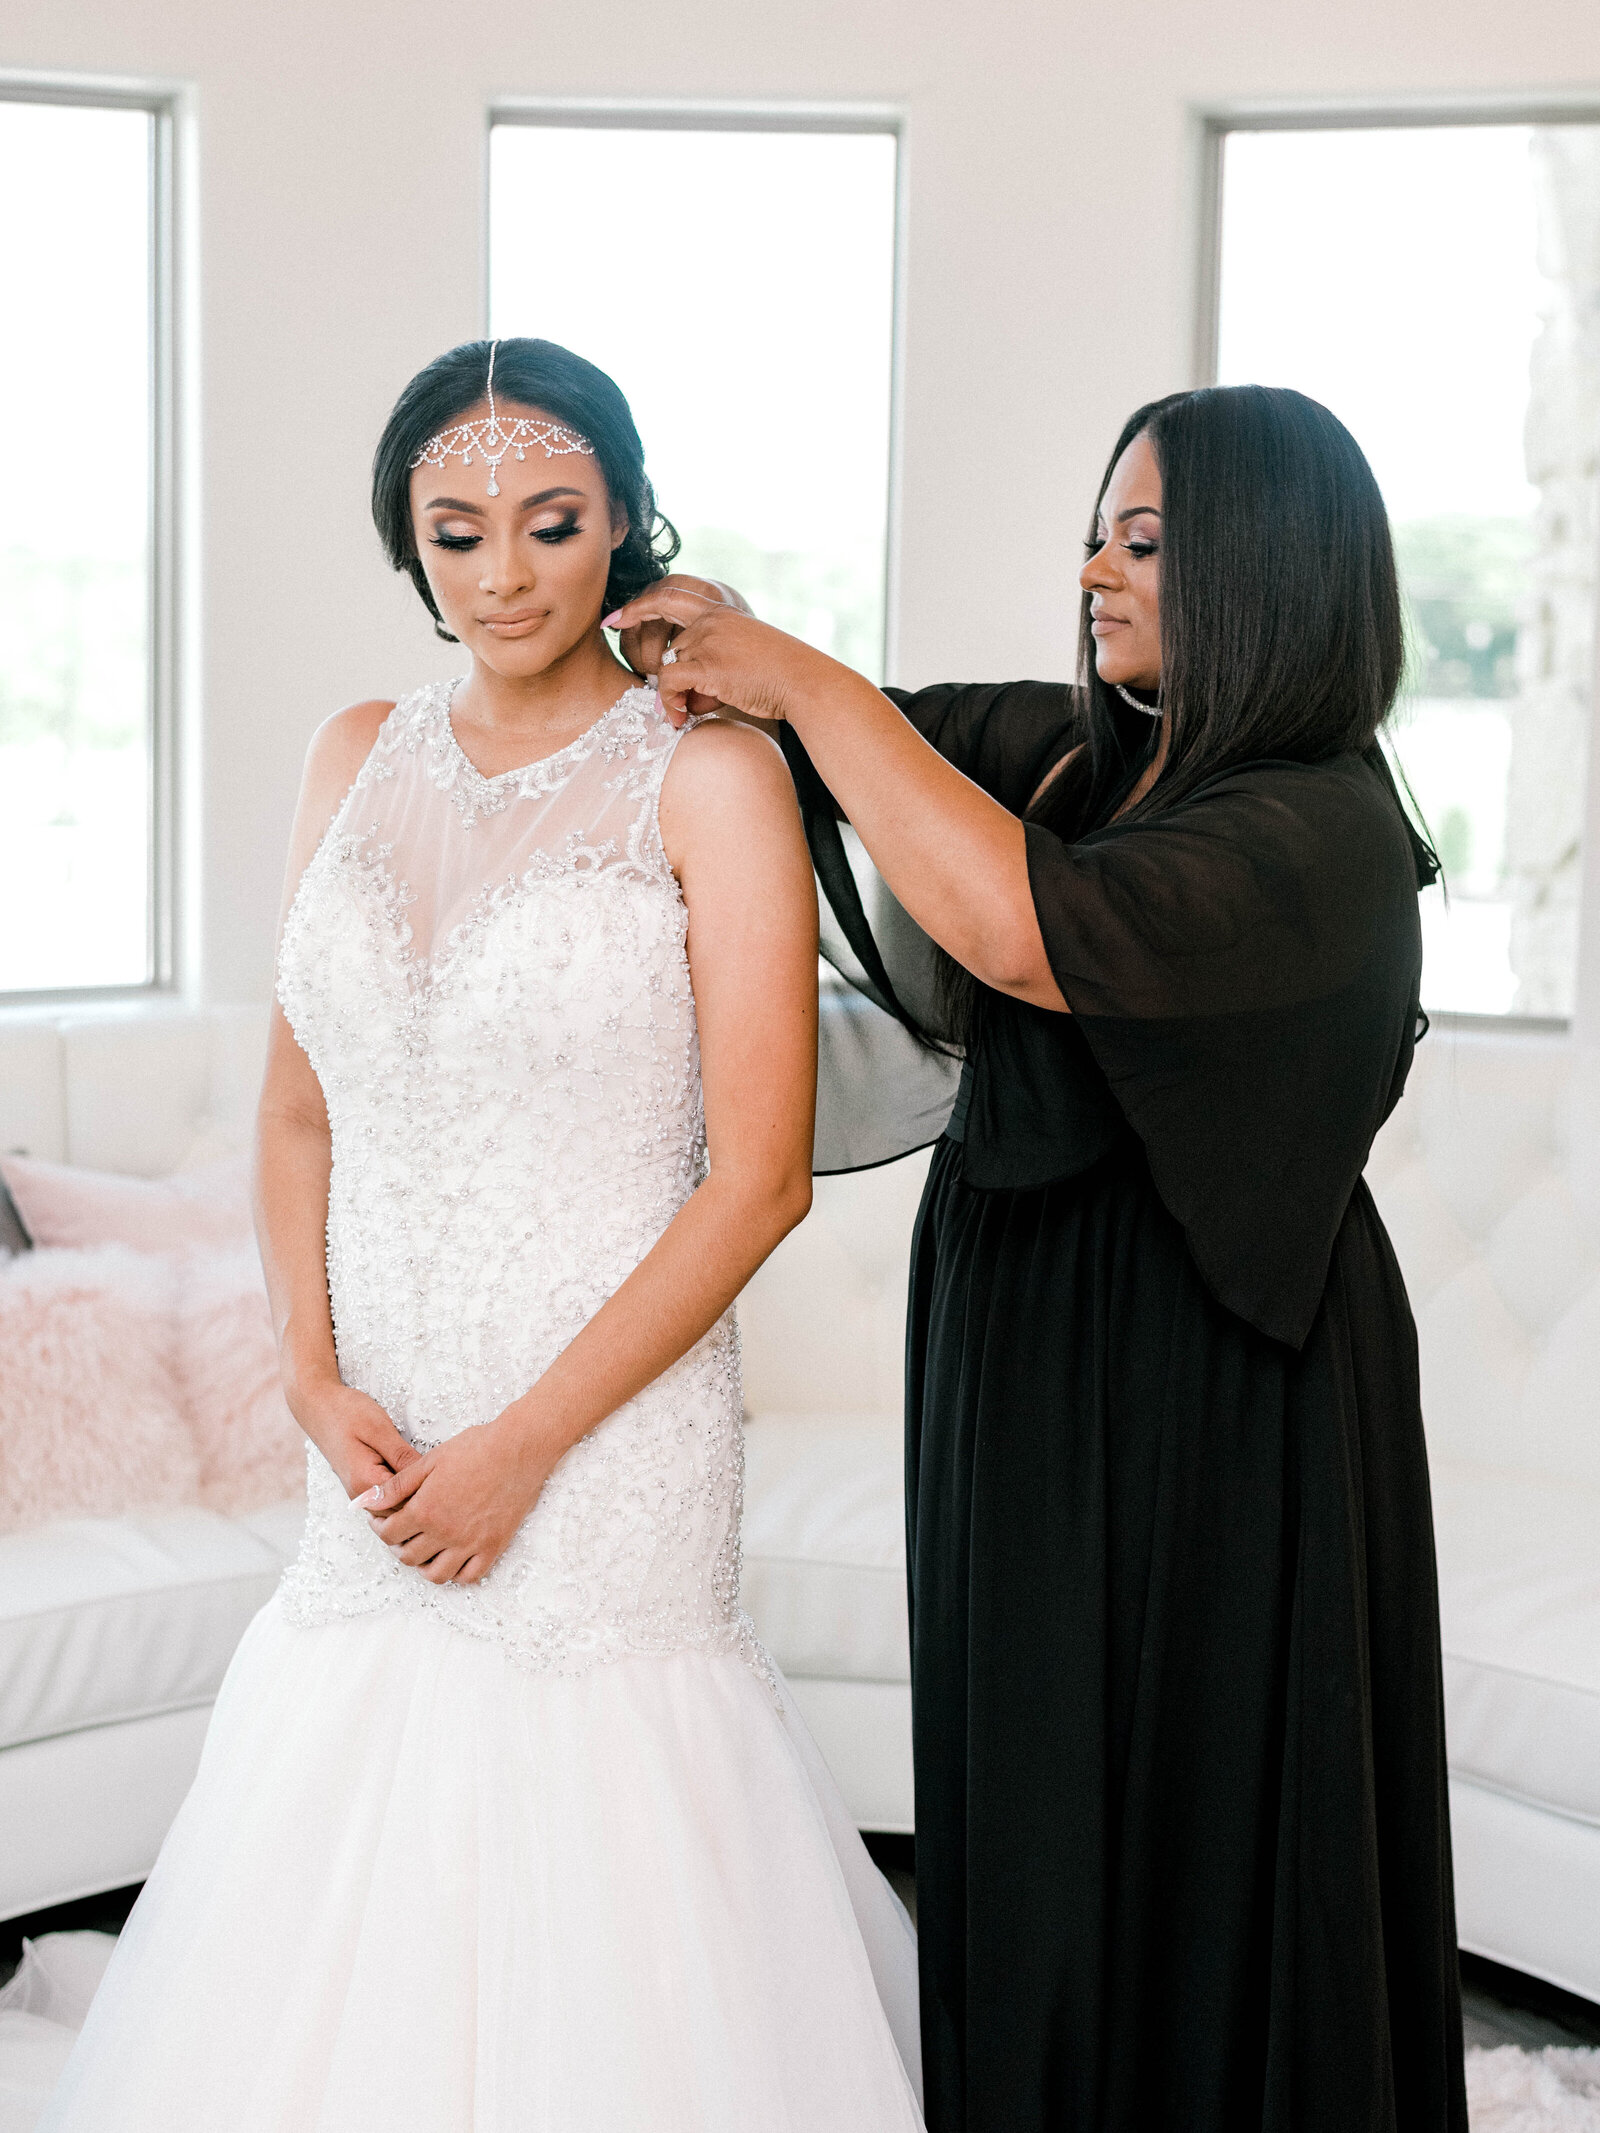 Bride with diamond headpiece and mermaid silhouette wedding dress getting ready with the mother of the bride